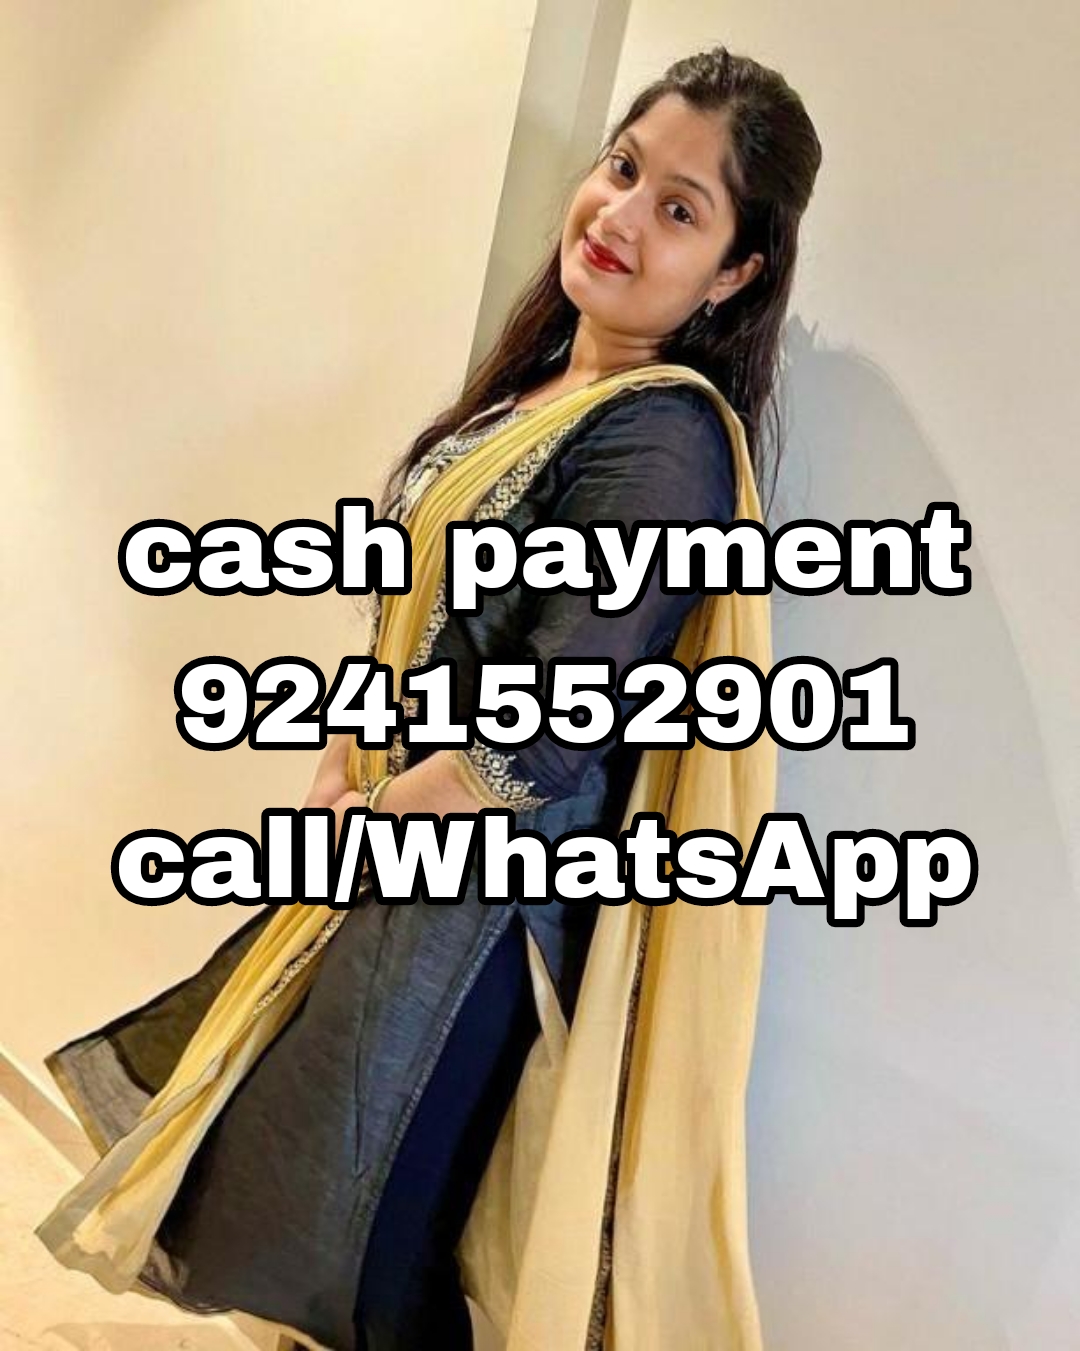 AHMEDABAD IN BEST SERVICE LOW PRICE FULL TRUSTED GENUINE SERVICE 